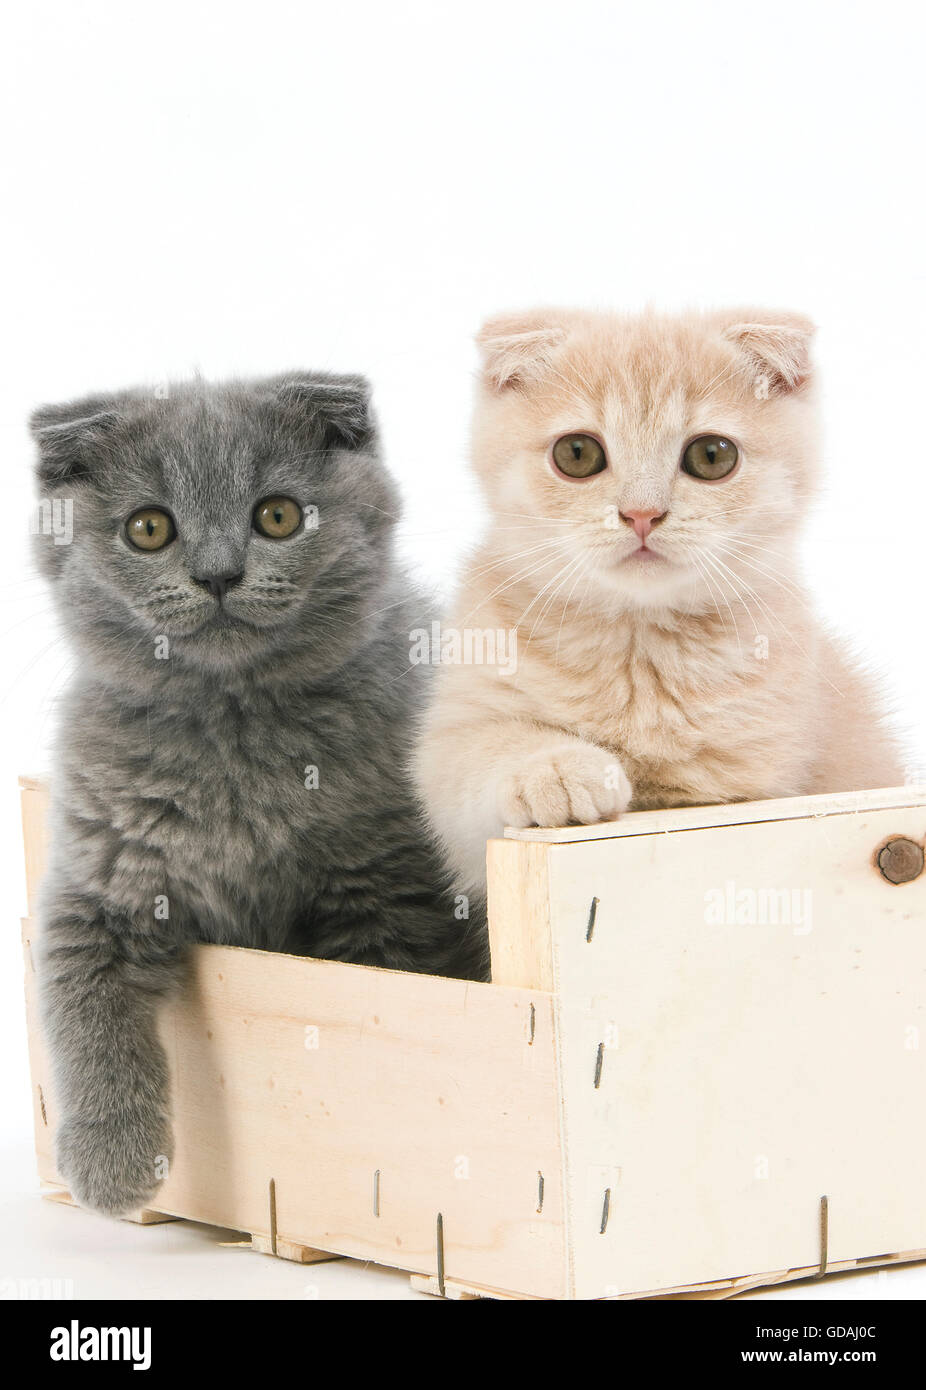 Cream Scottish Fold and Blue Scottish Fold Domestic Cat, 2 months old Kittens playing in Crateful against White Background Stock Photo